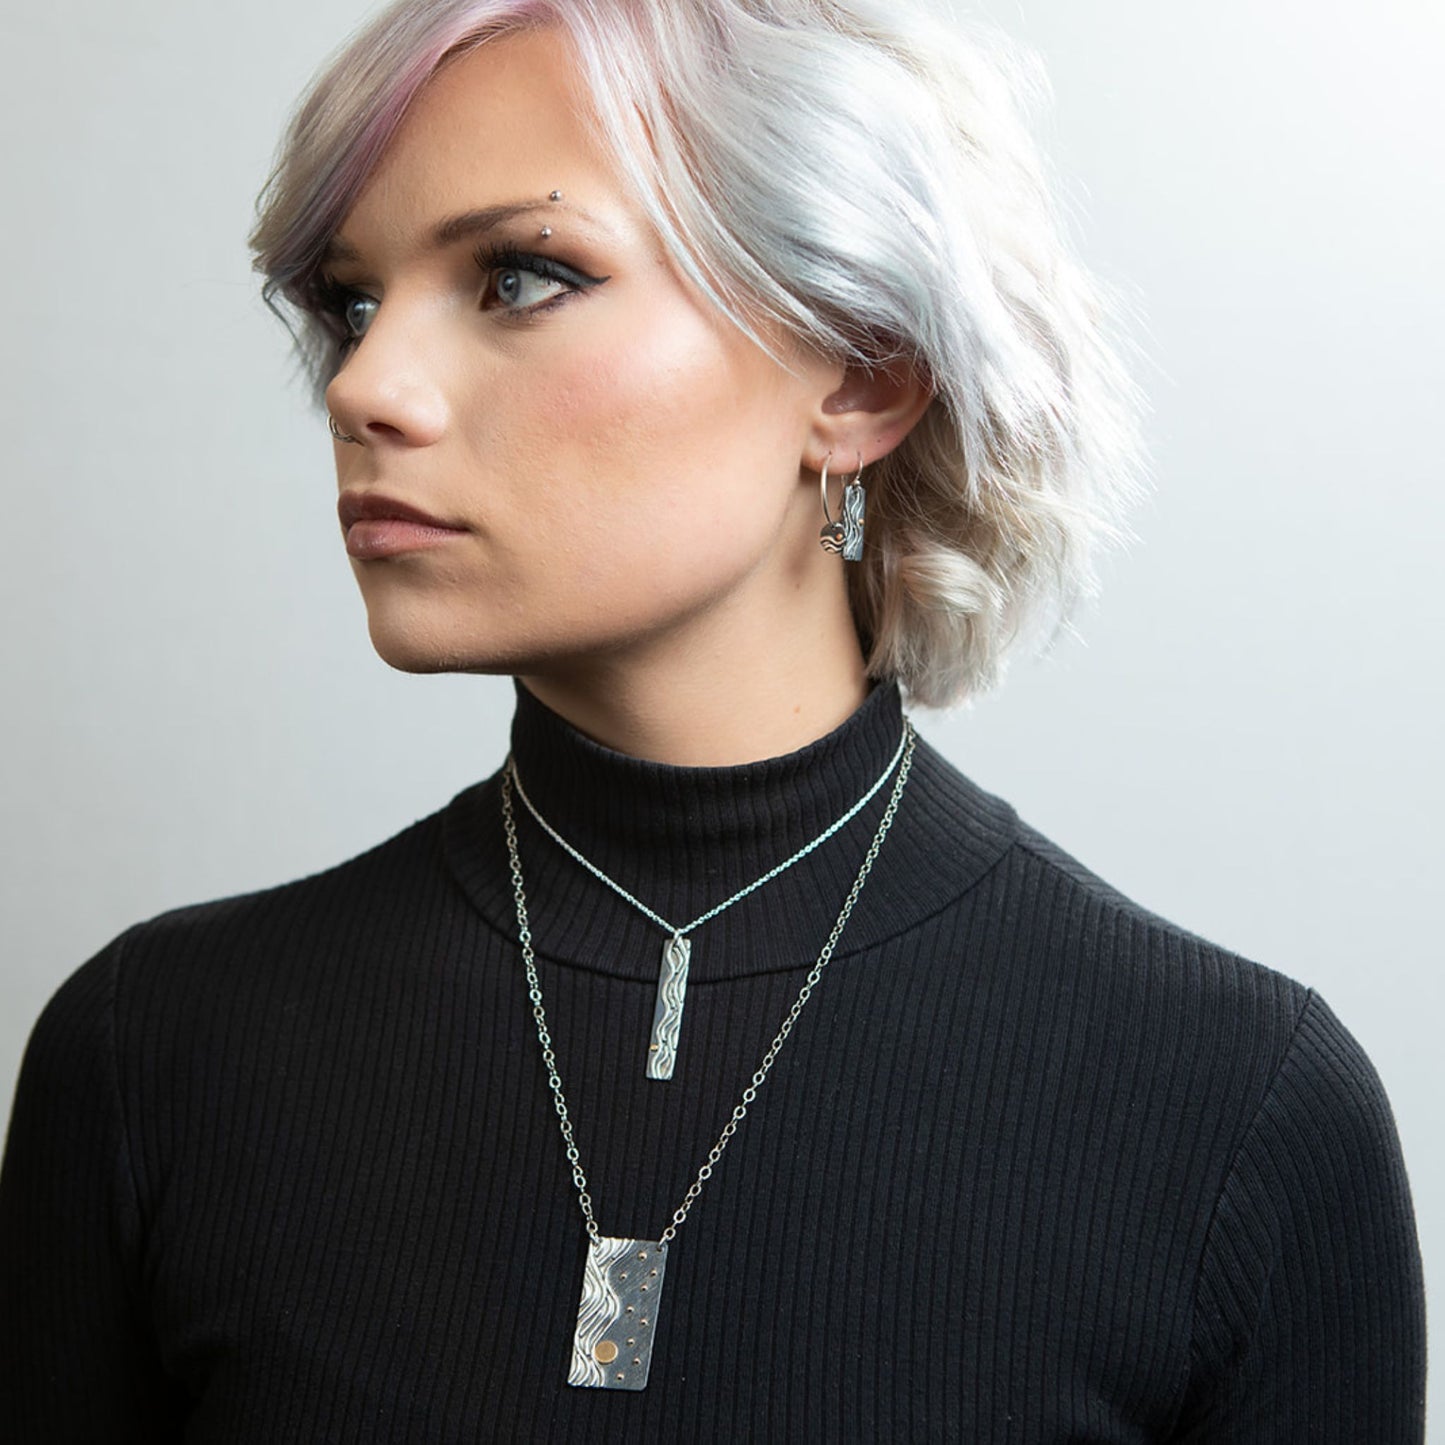 Model wearing Reflections necklaces